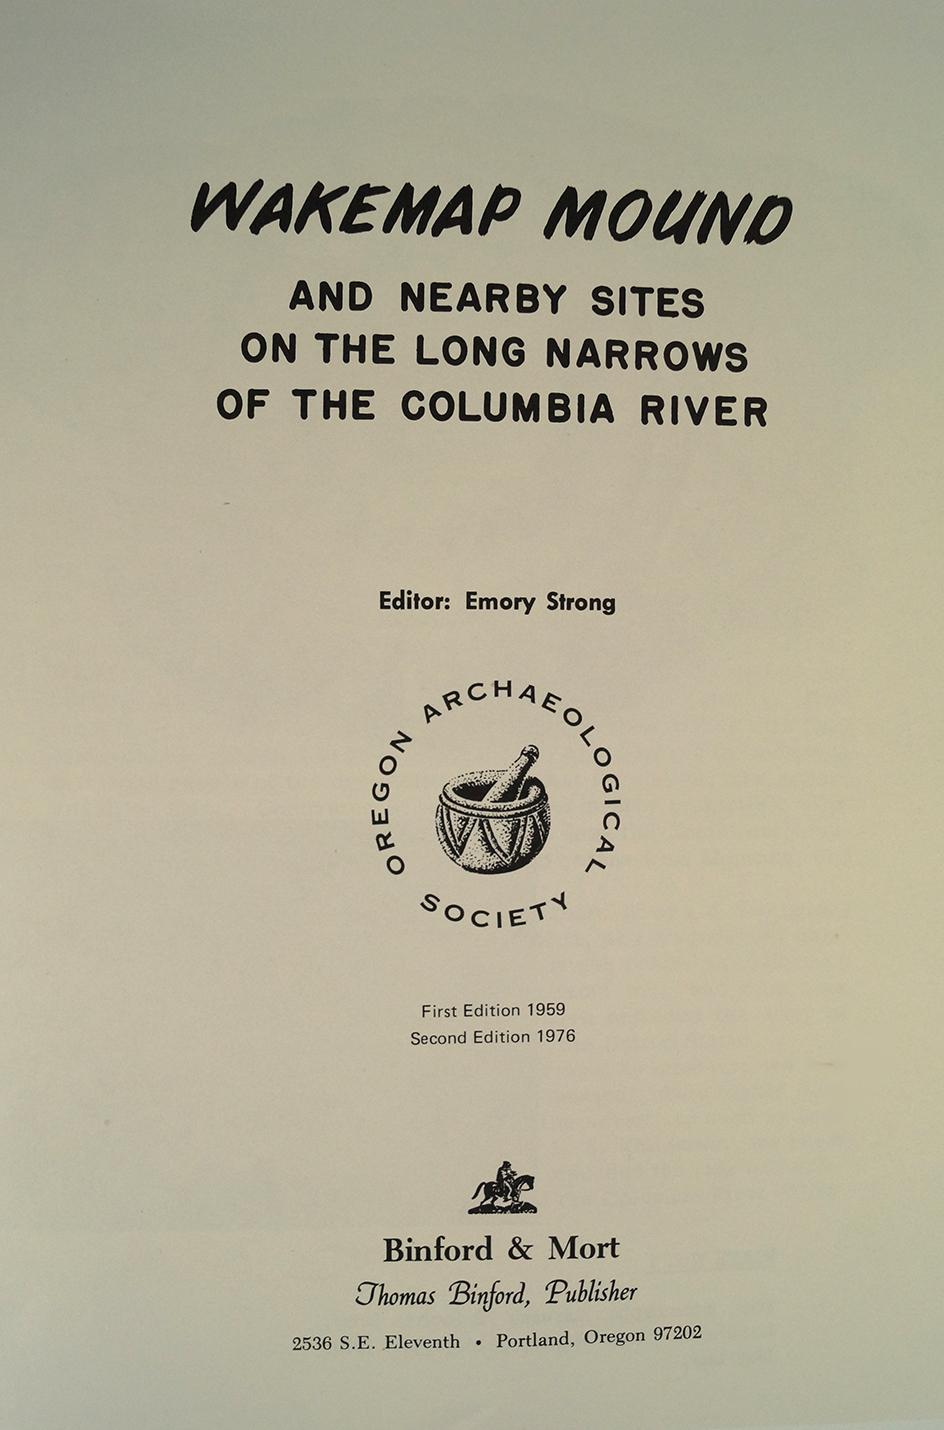 Booklet: Wakemap Mound - A stratified site on the Columbia River. Softcover